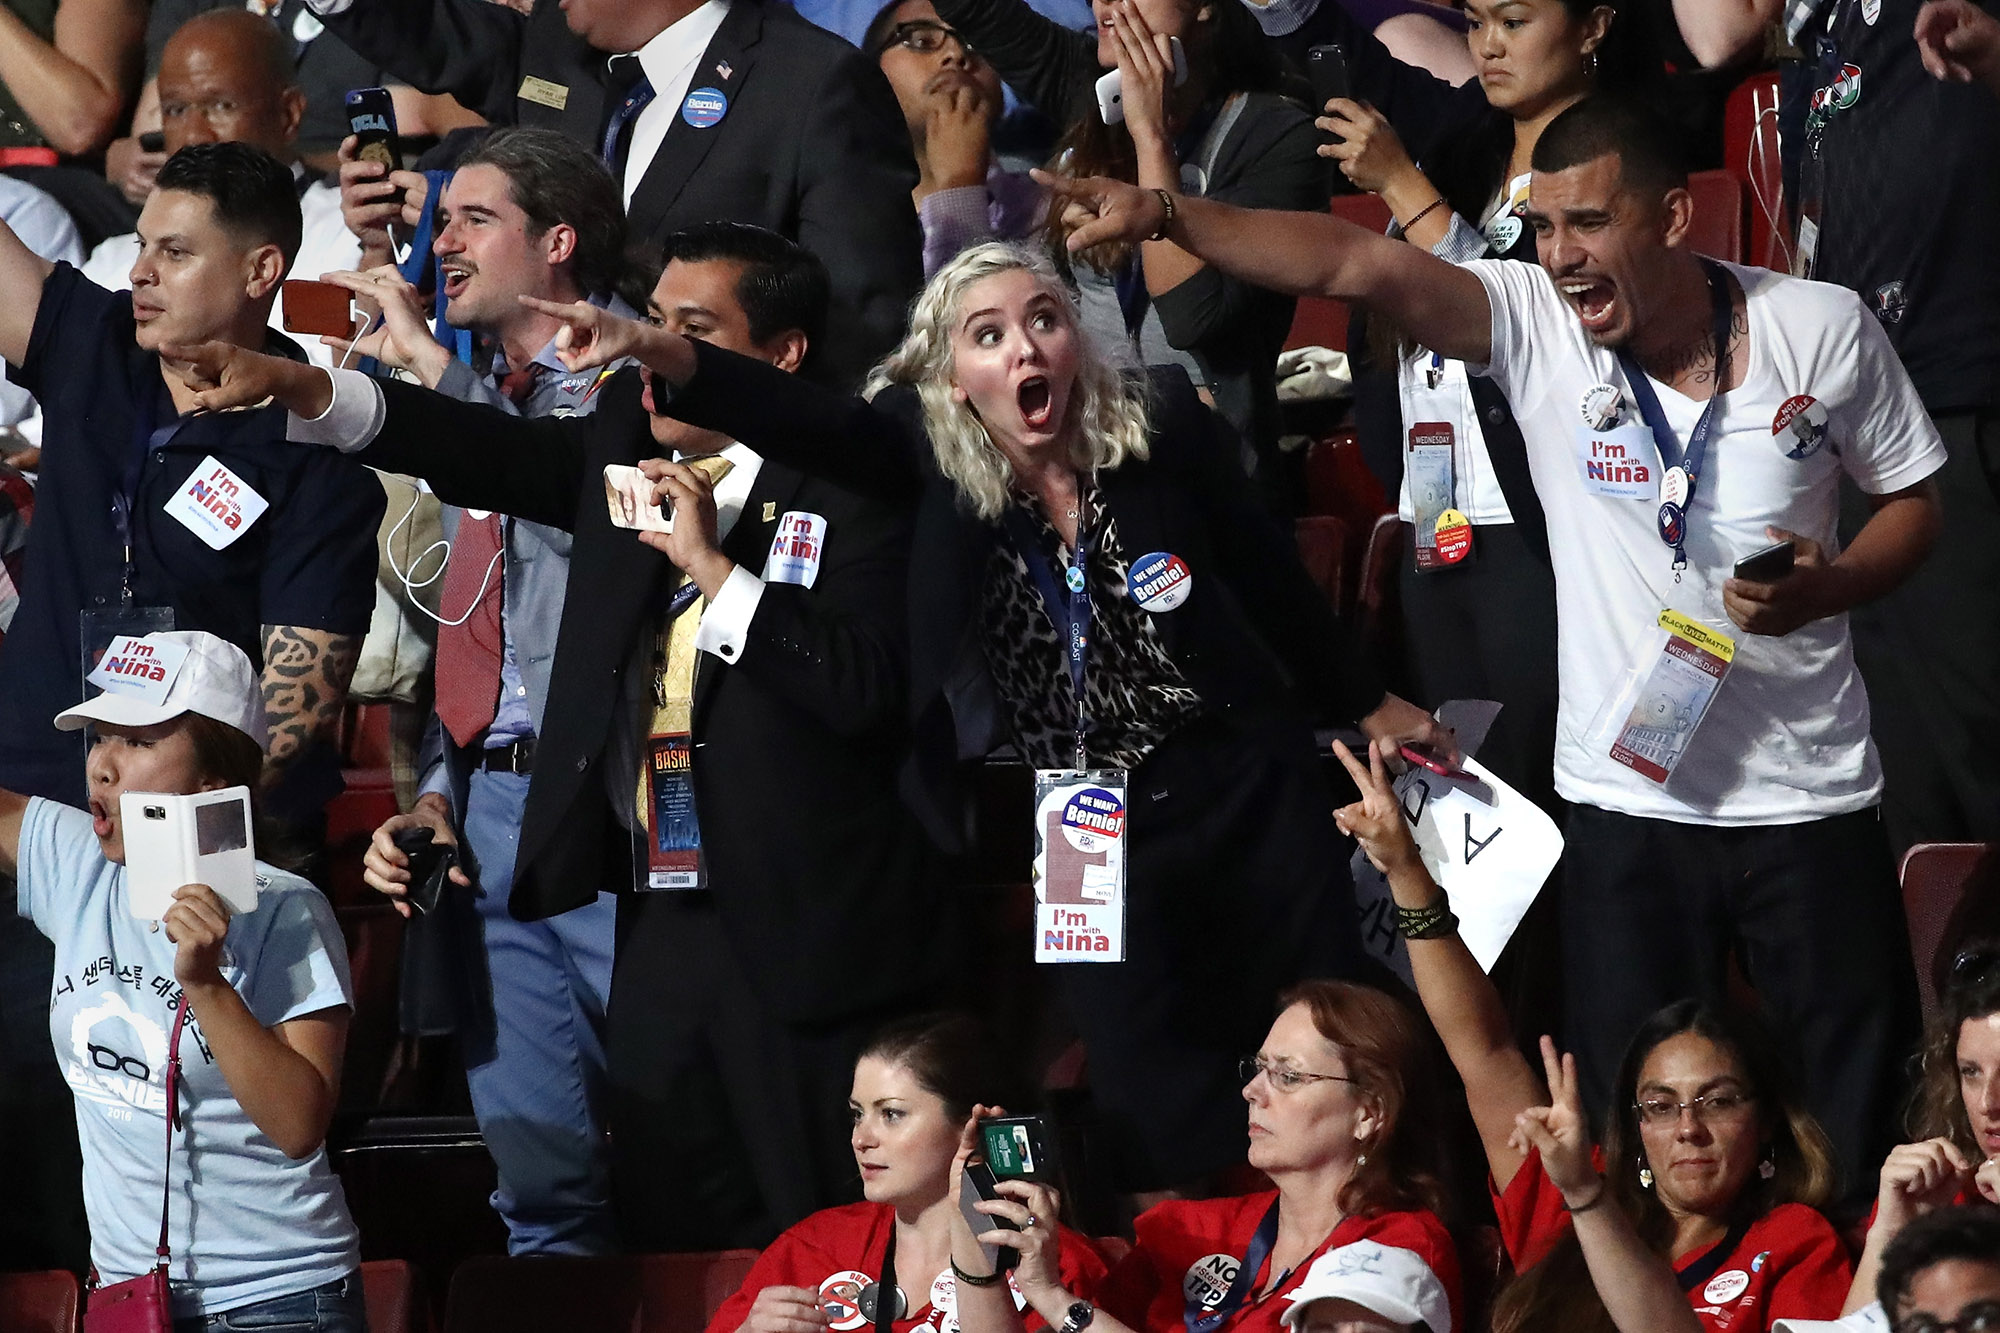 PHOTO: Attendees chant during former Secretary of Defense Leon Panetta's speech on the third day of the Democratic National Convention, July 27, 2016, in Philadelphia.